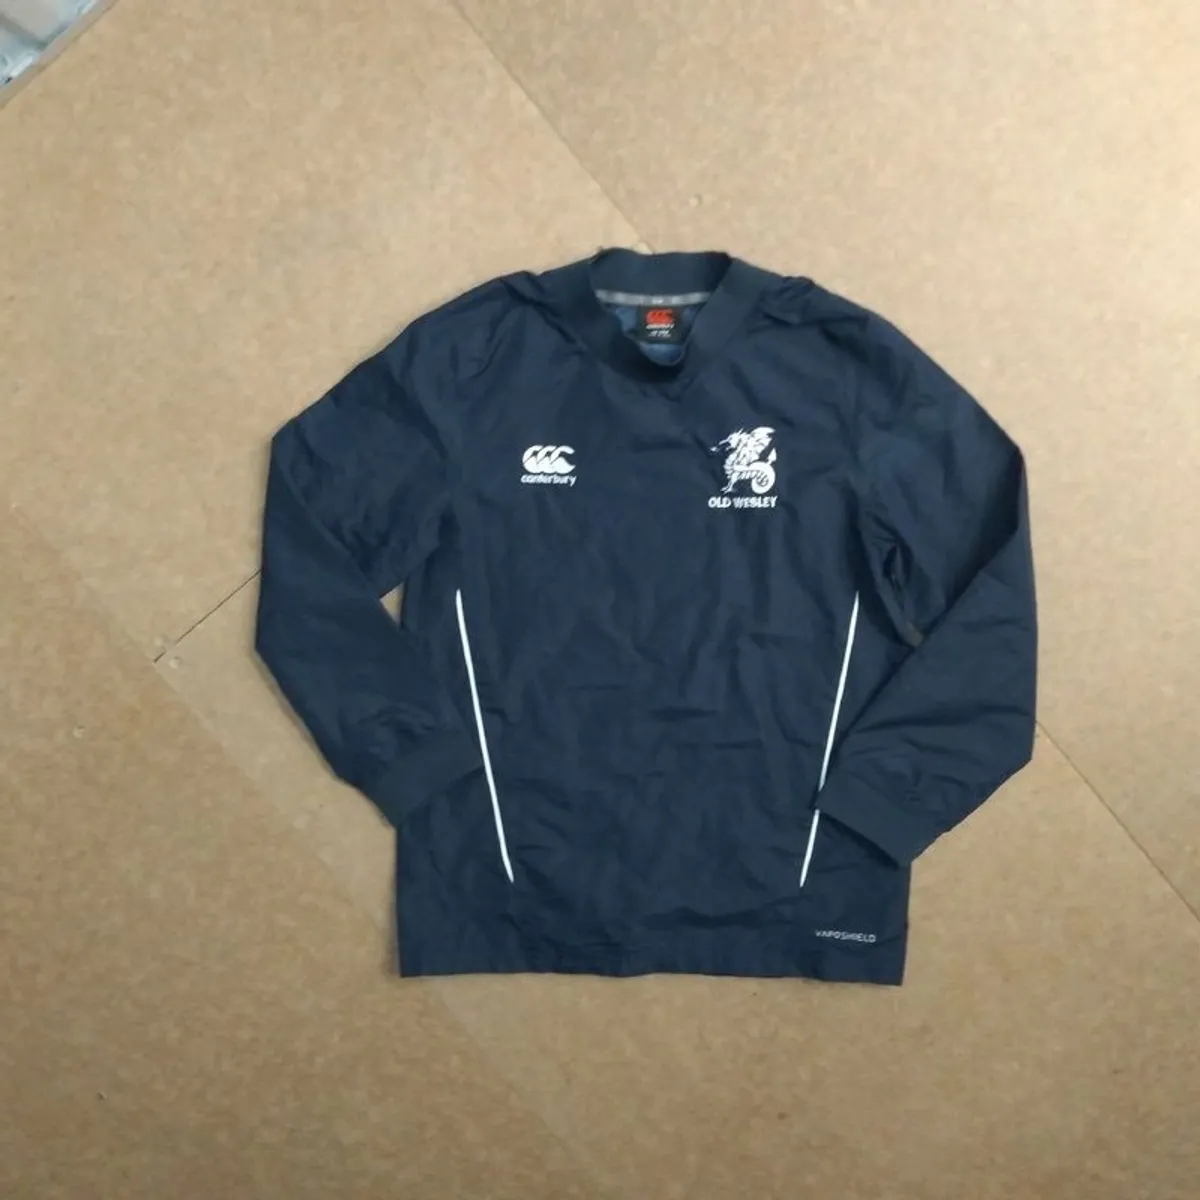 FREE POST Kids Old Wesley (12 Years) Rugby Jacket Canterbury Track Suit Top Wind Breaker Dublin Childs Youths Childrens Boys Girls - Image 1